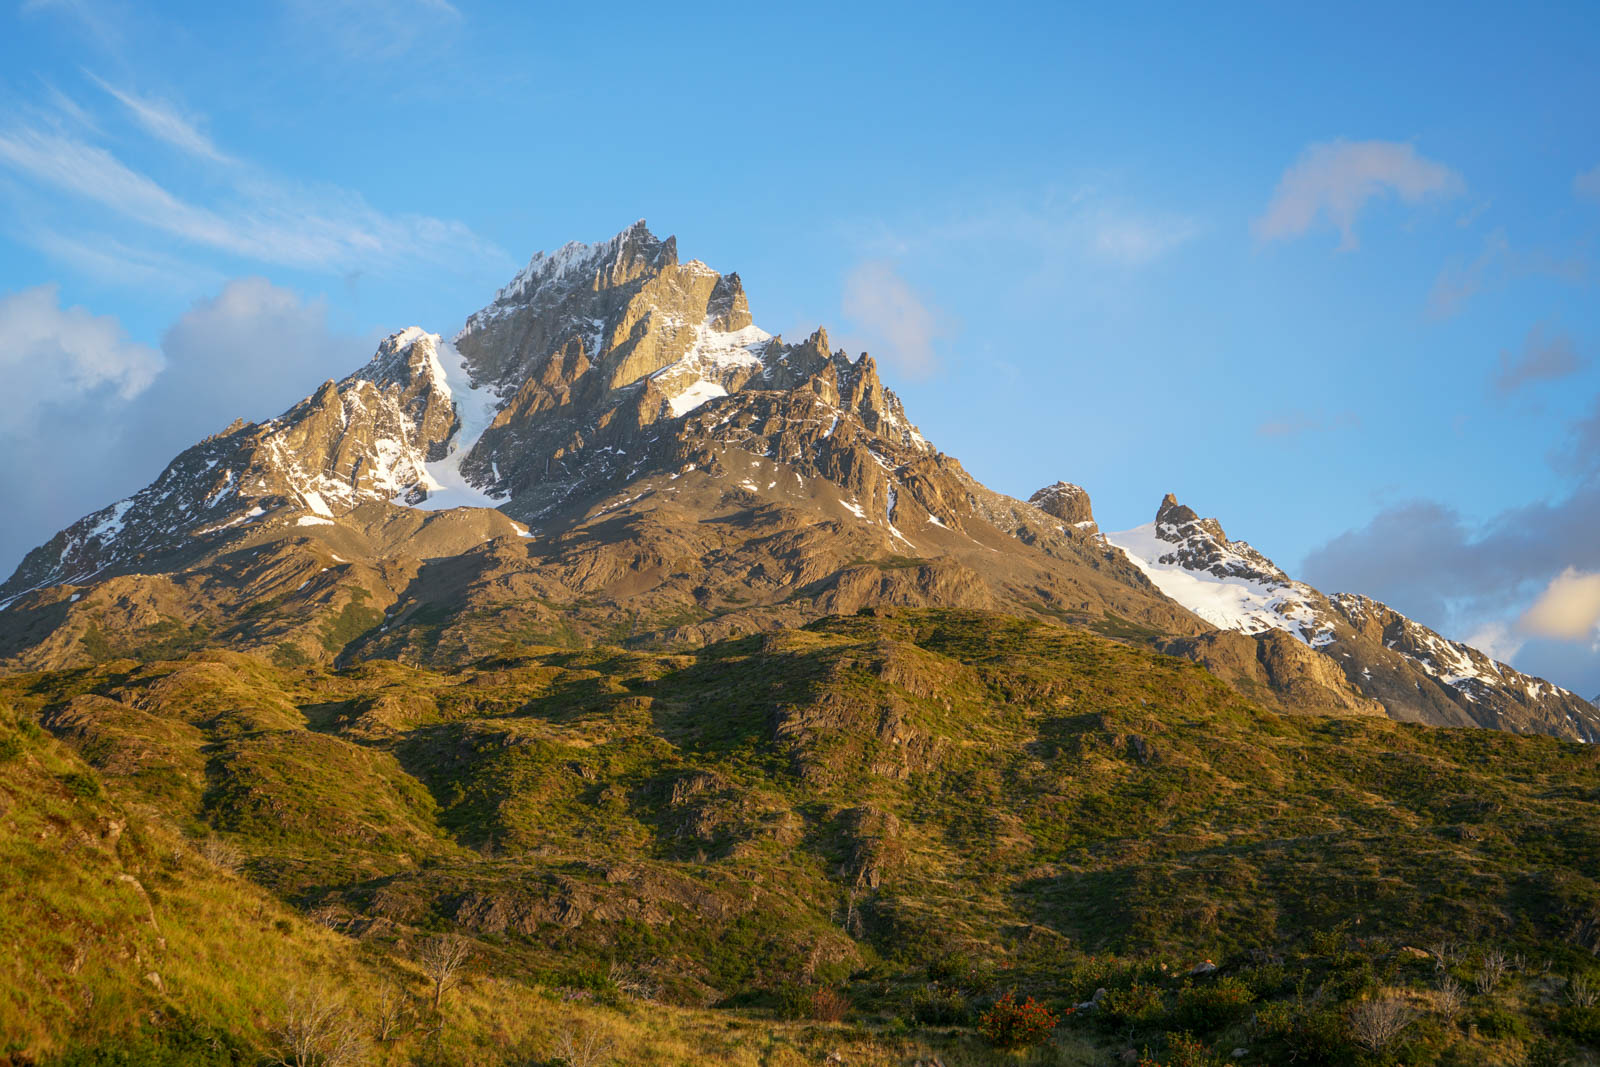 Early Morning Light on Patagonian Peaks